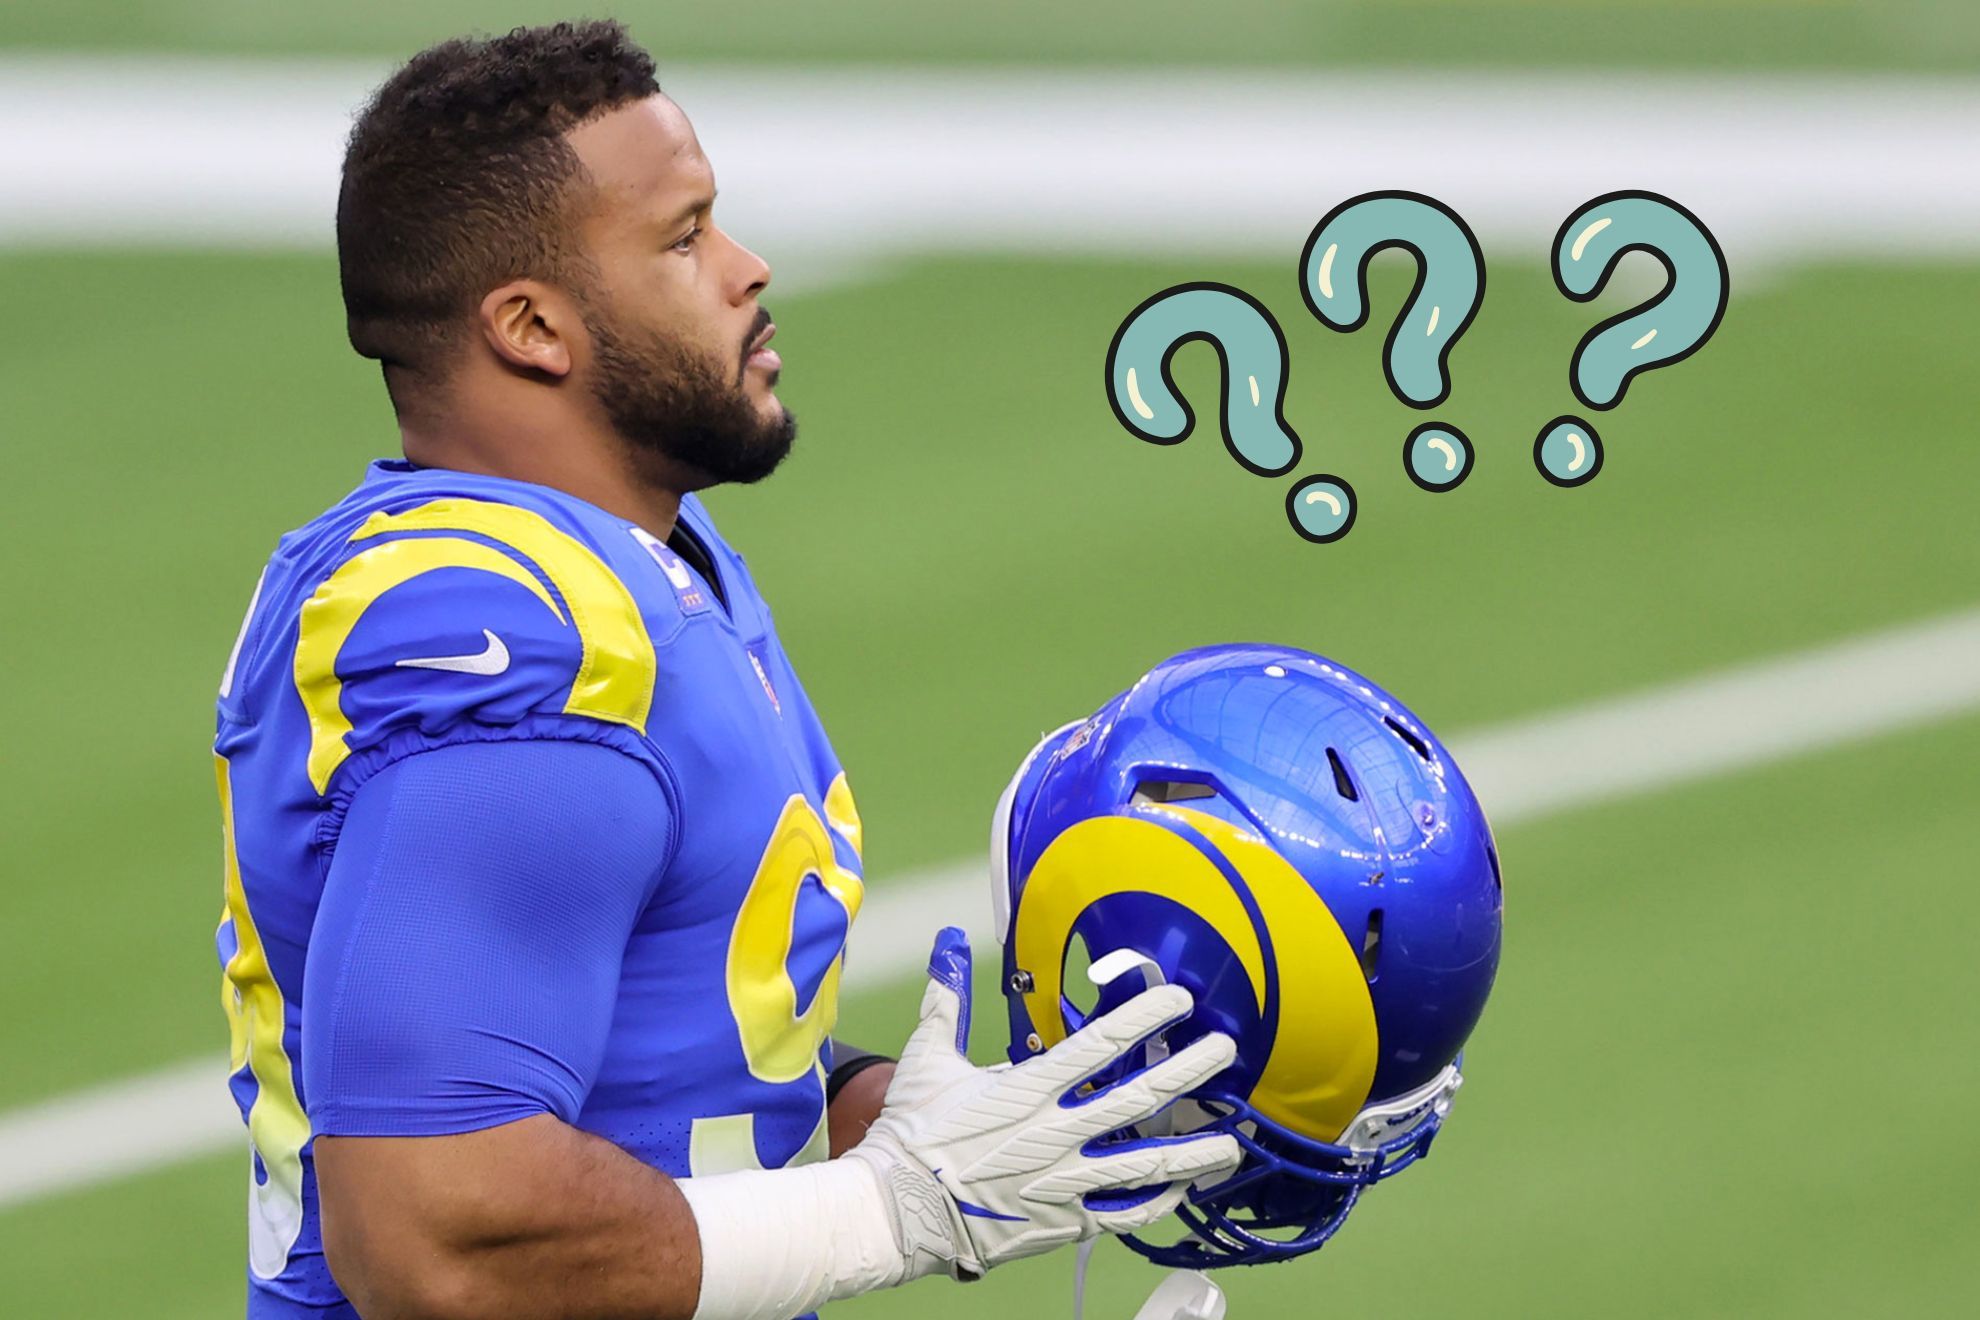 Aaron Donald may have dropped a strong hint about hanging up his cleats this offseason.